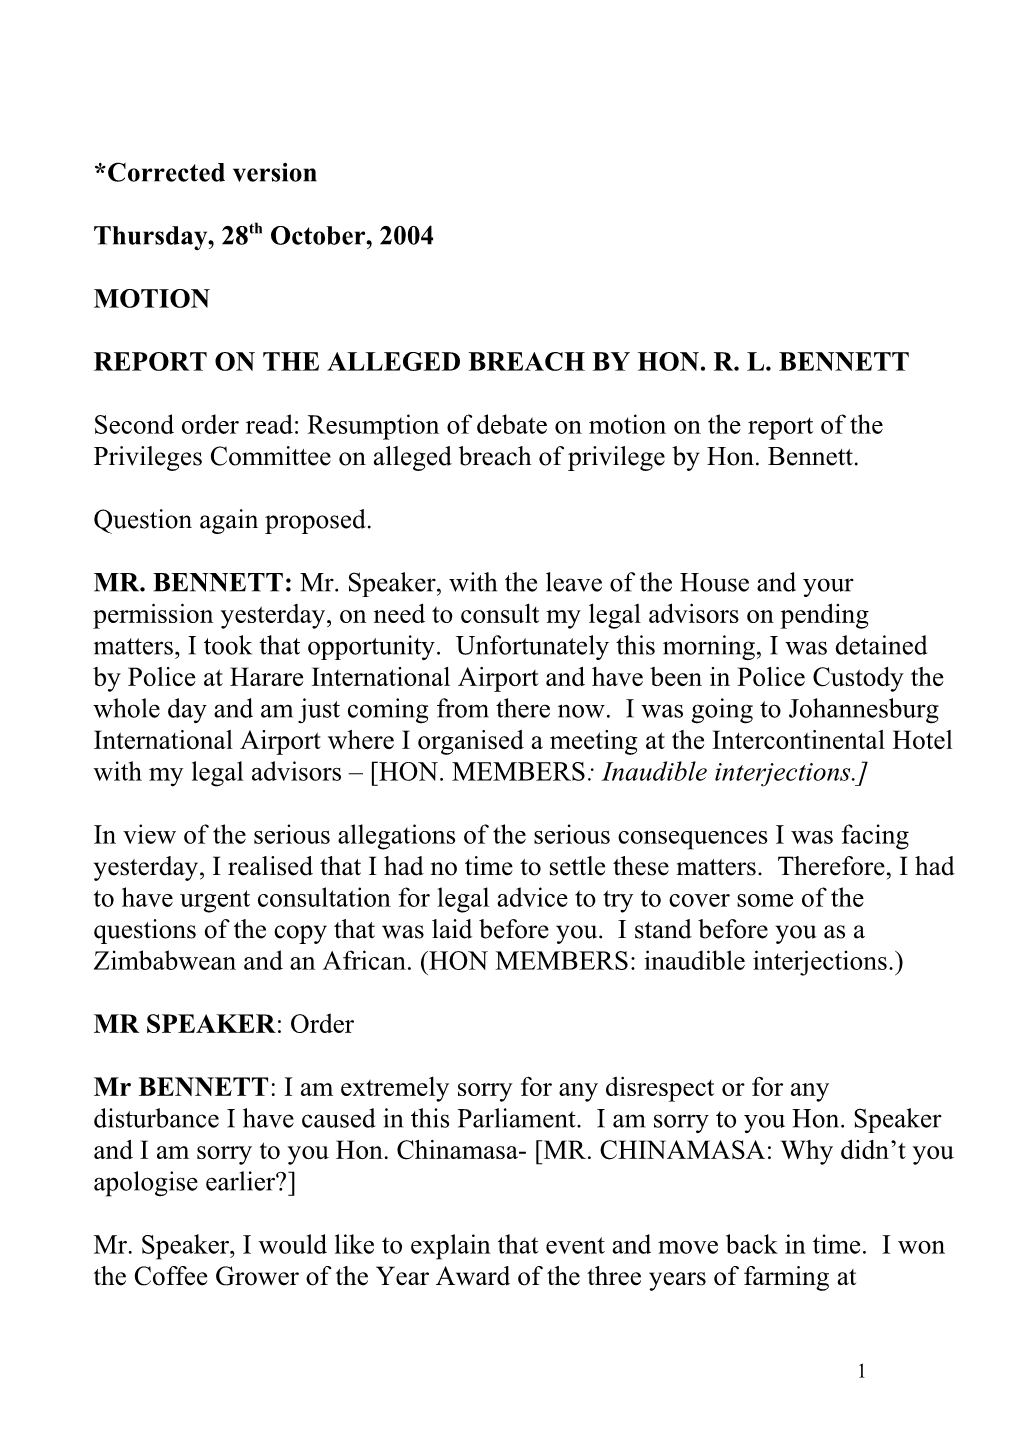 Report on the Alleged Breach by Hon. R. L. Bennett